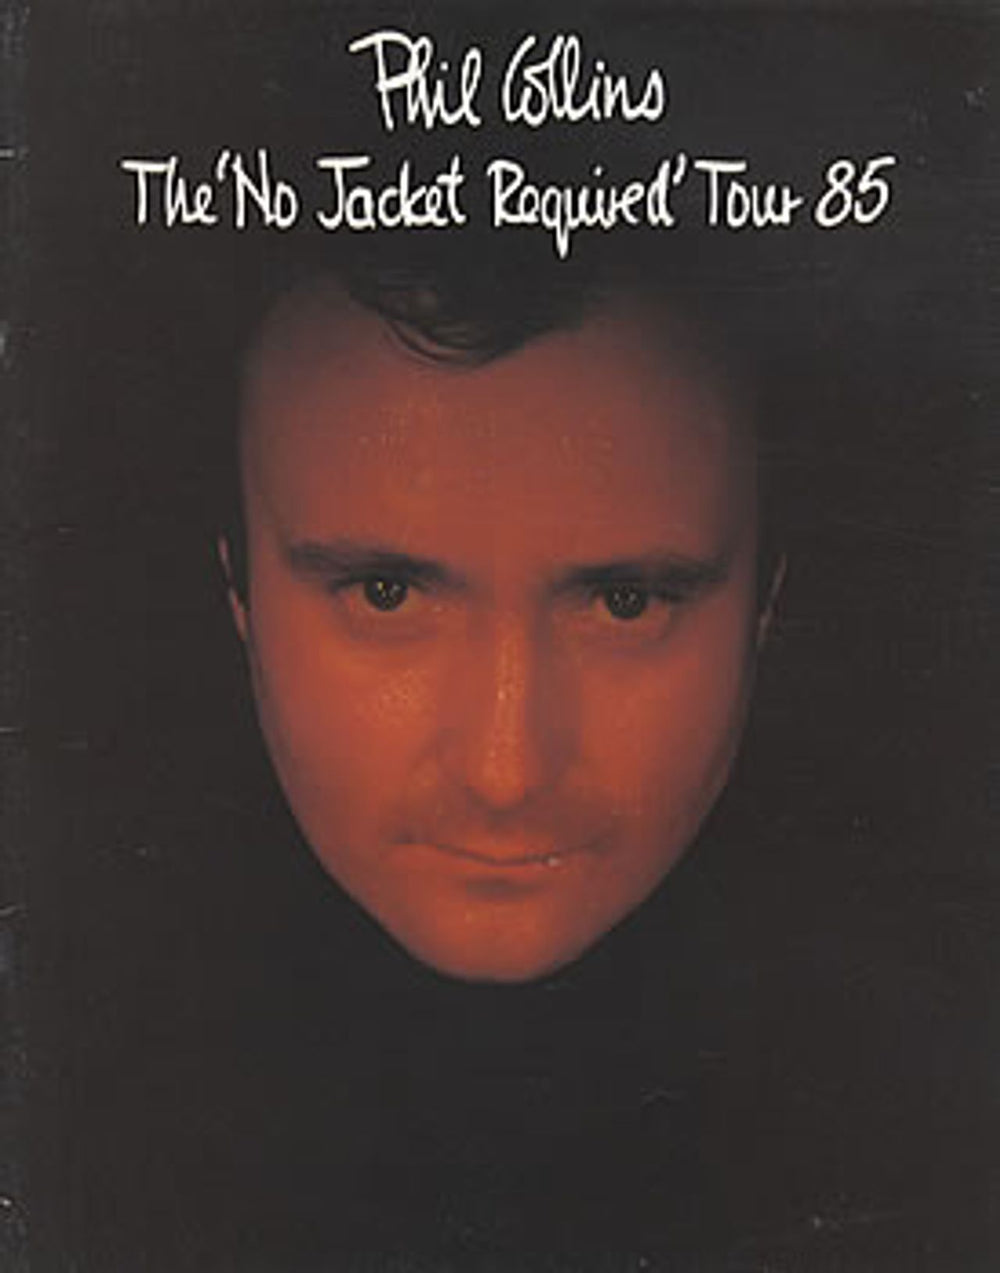 Phil Collins The 'No Jacket Required' Tour 85 + ticket stubs UK tour programme PROGRAMME + TICKET